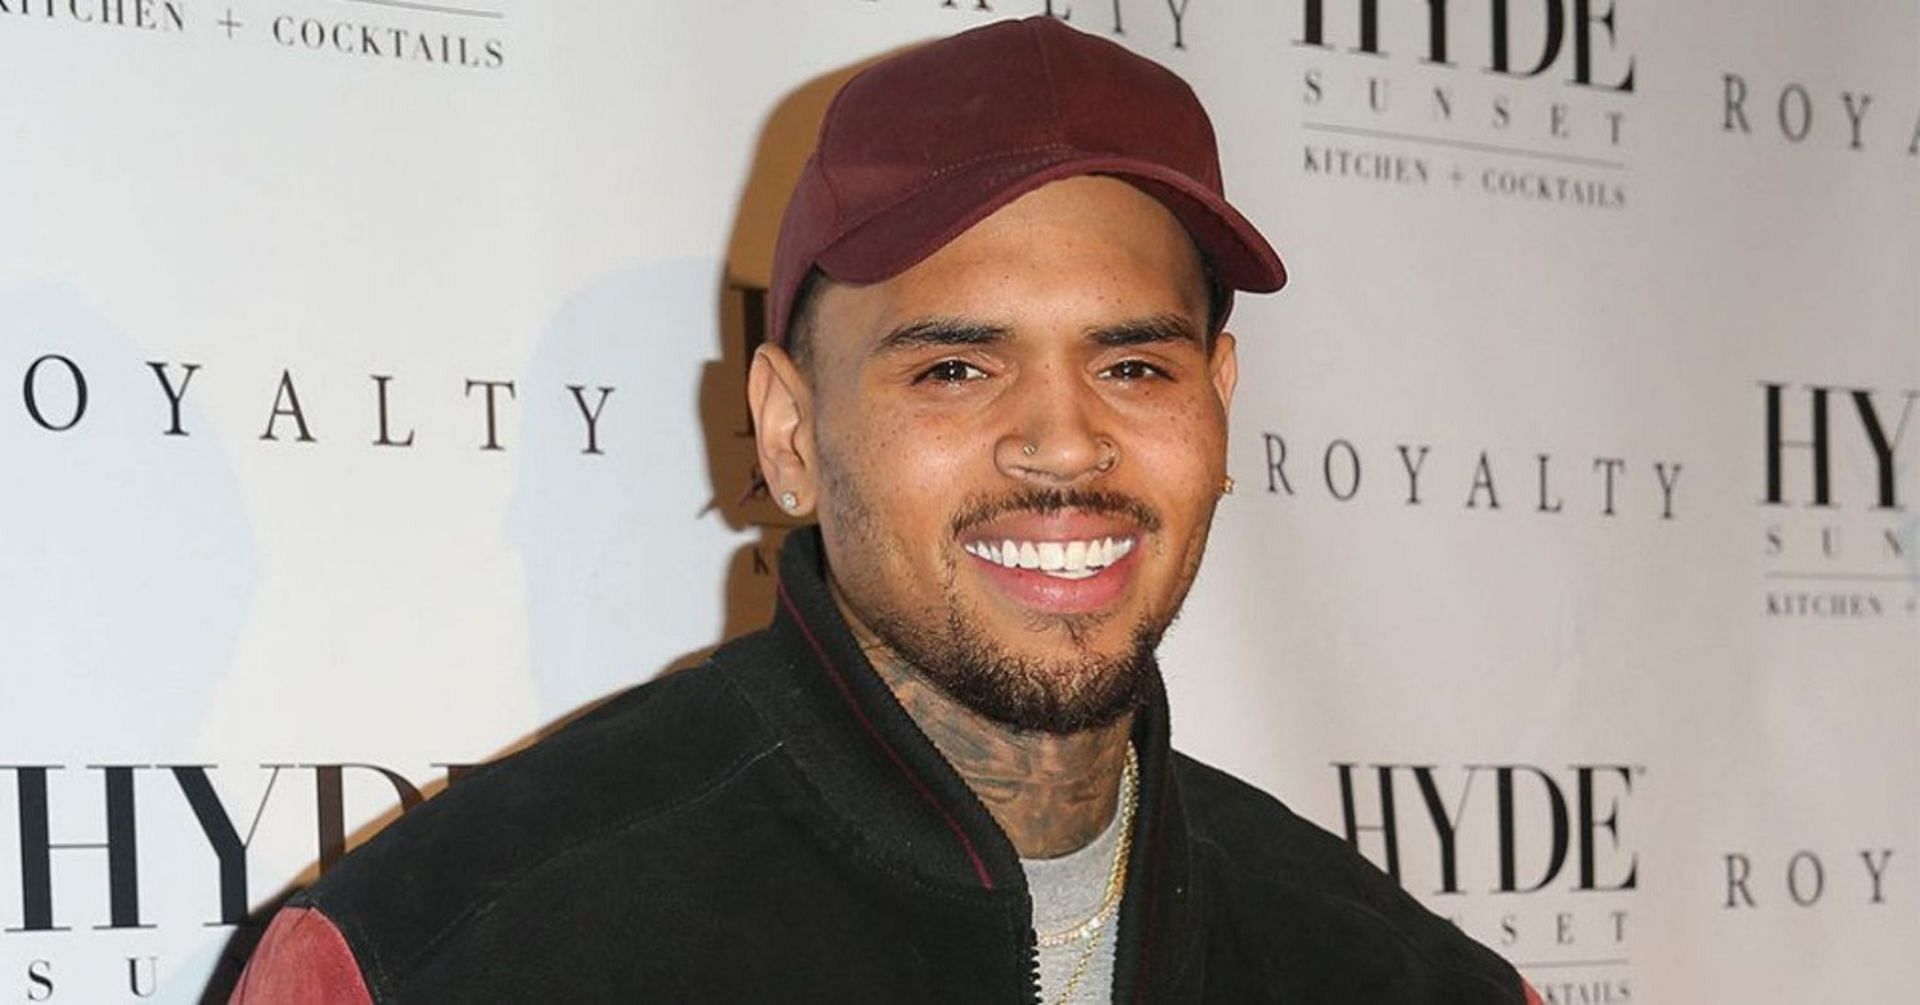 Chris Brown addresses hate he receives from assaulting Rihanna (Image via Getty Images)